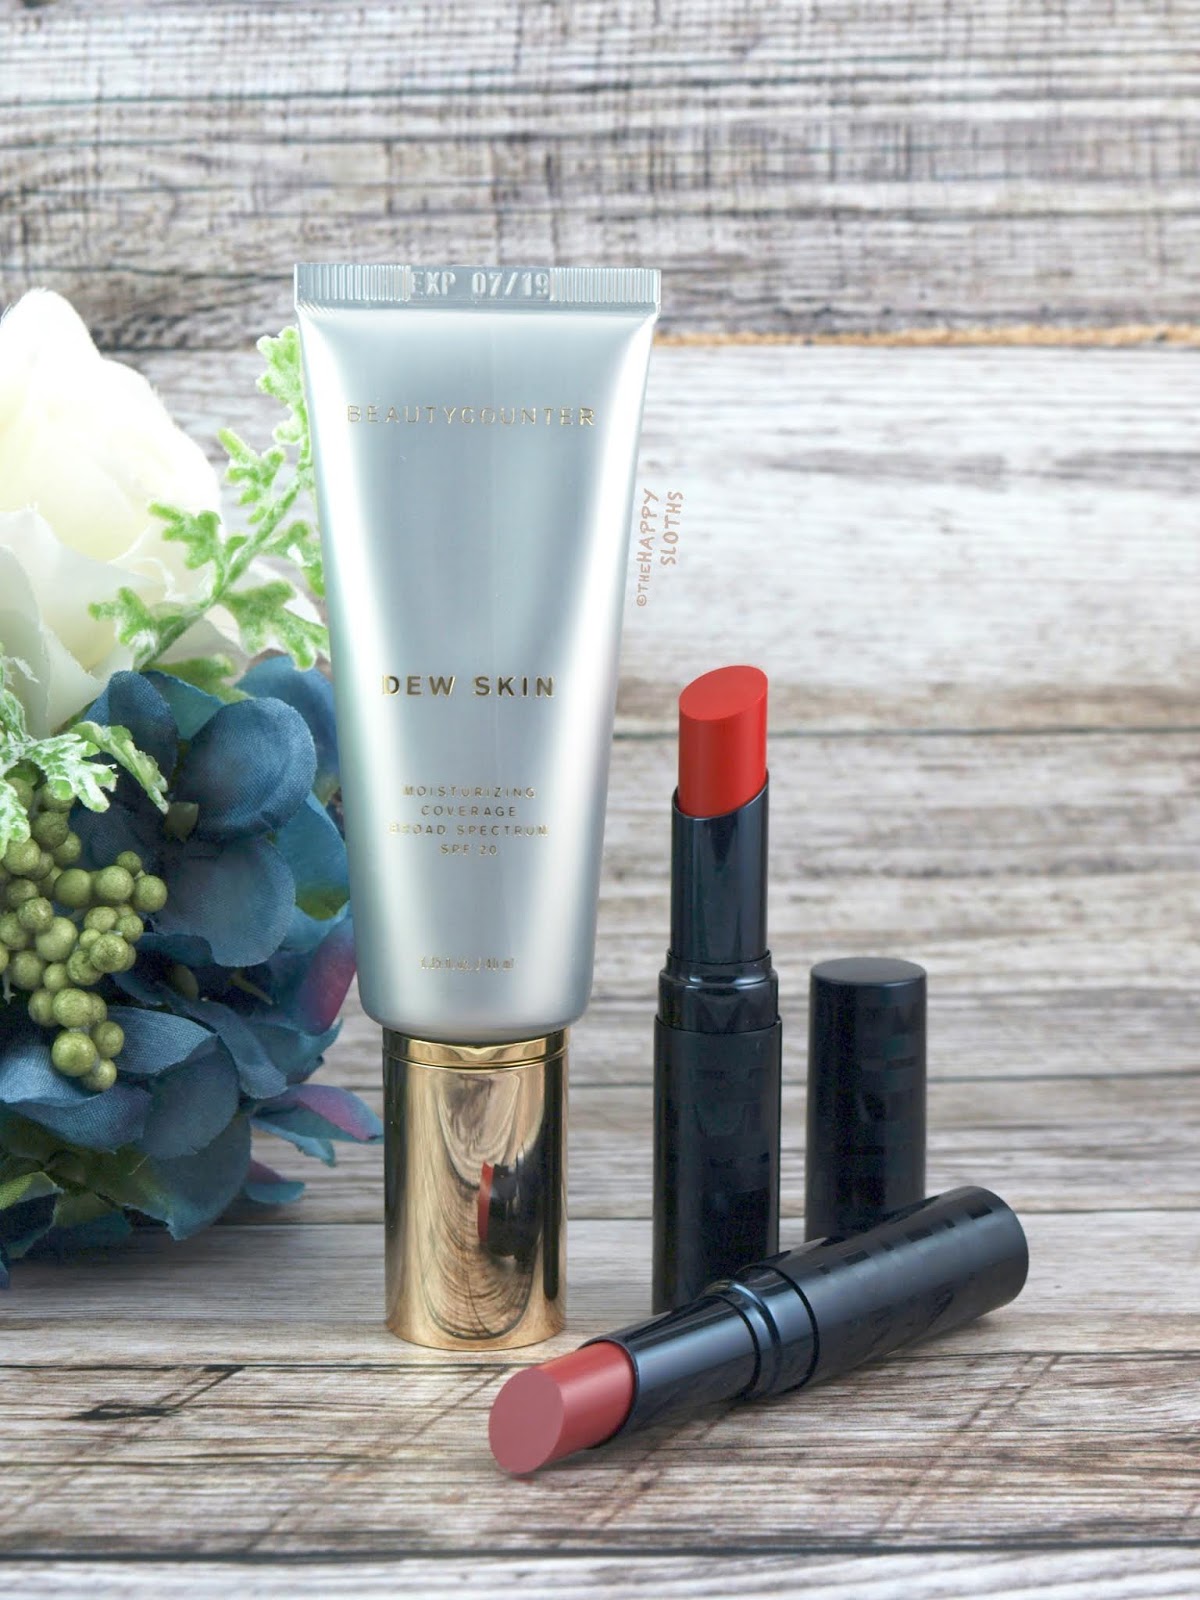 Beautycounter | Dew Skin Moisturizing Coverage SPF 20 & Color Intense Lipstick: Review and Swatches